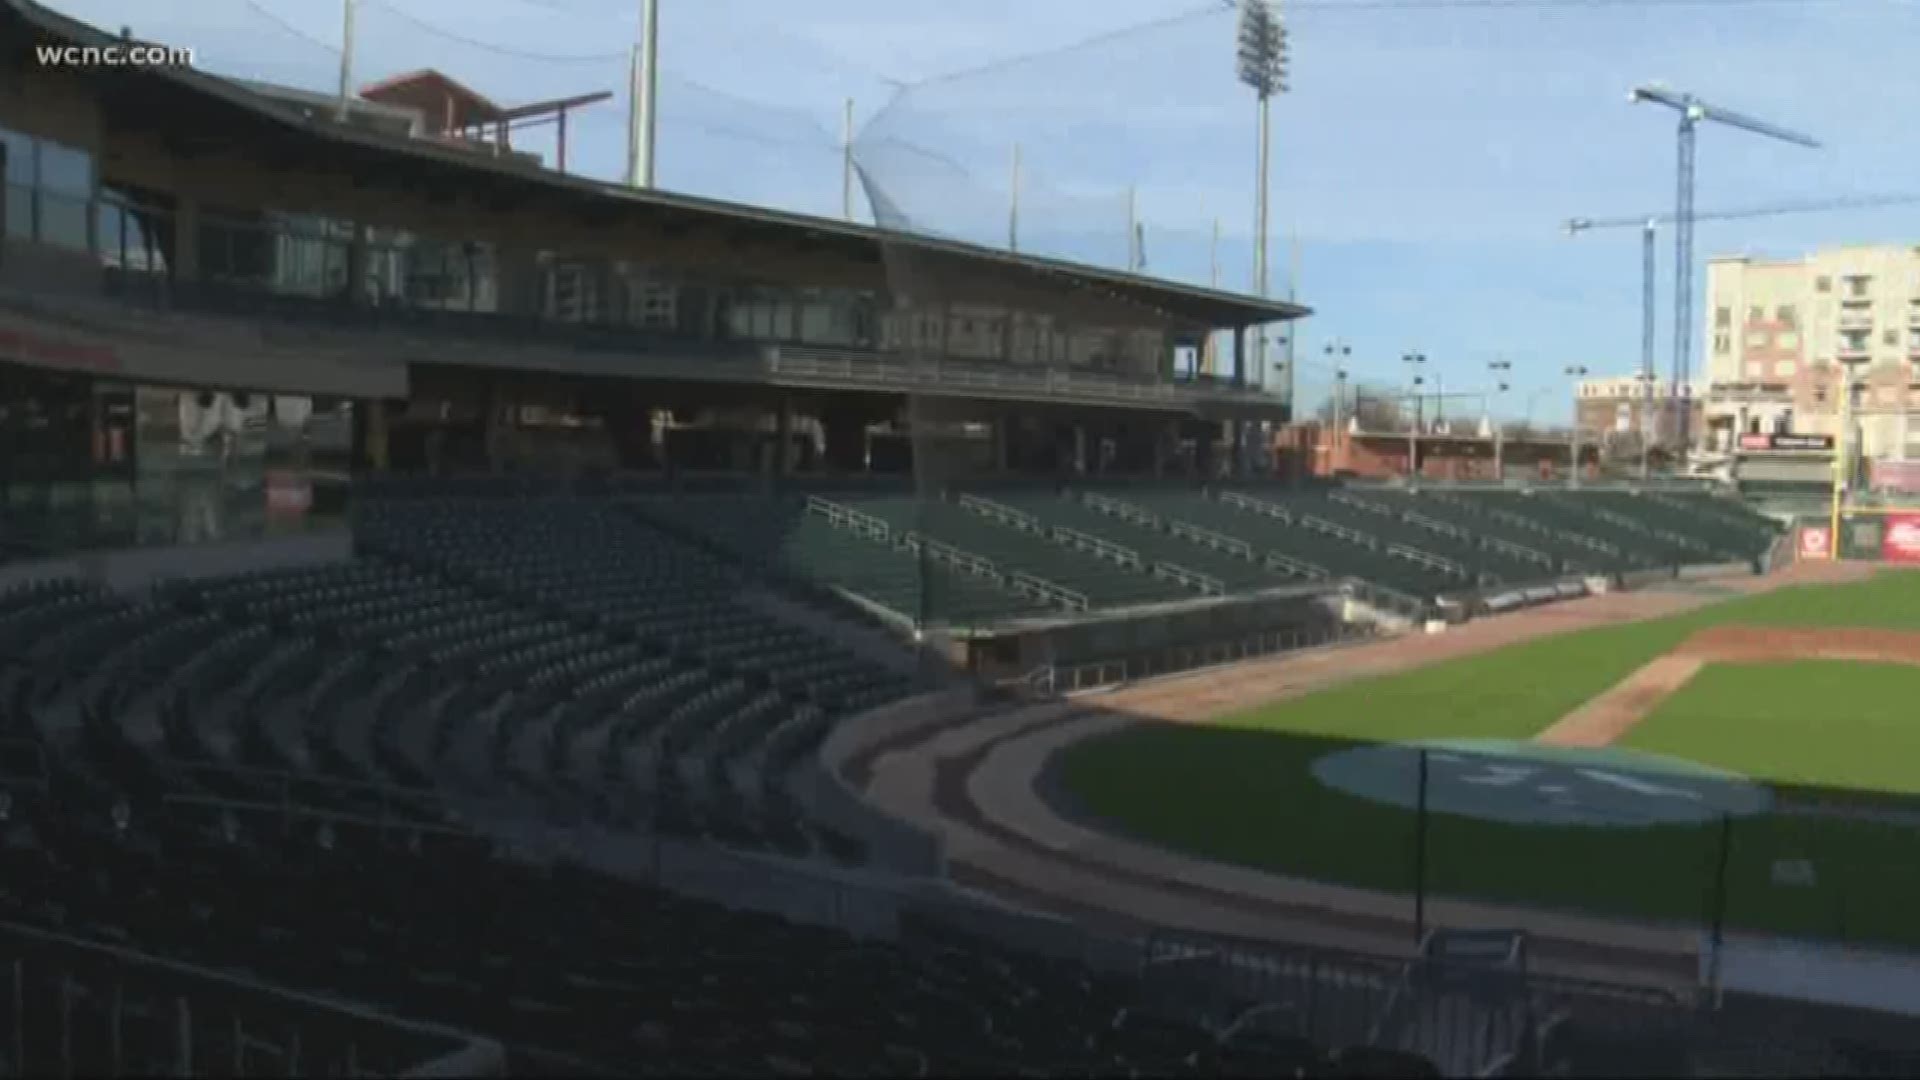 The Knights announced Thursday they are extending the safety netting around BB&T Ballpark for the 2020 season.